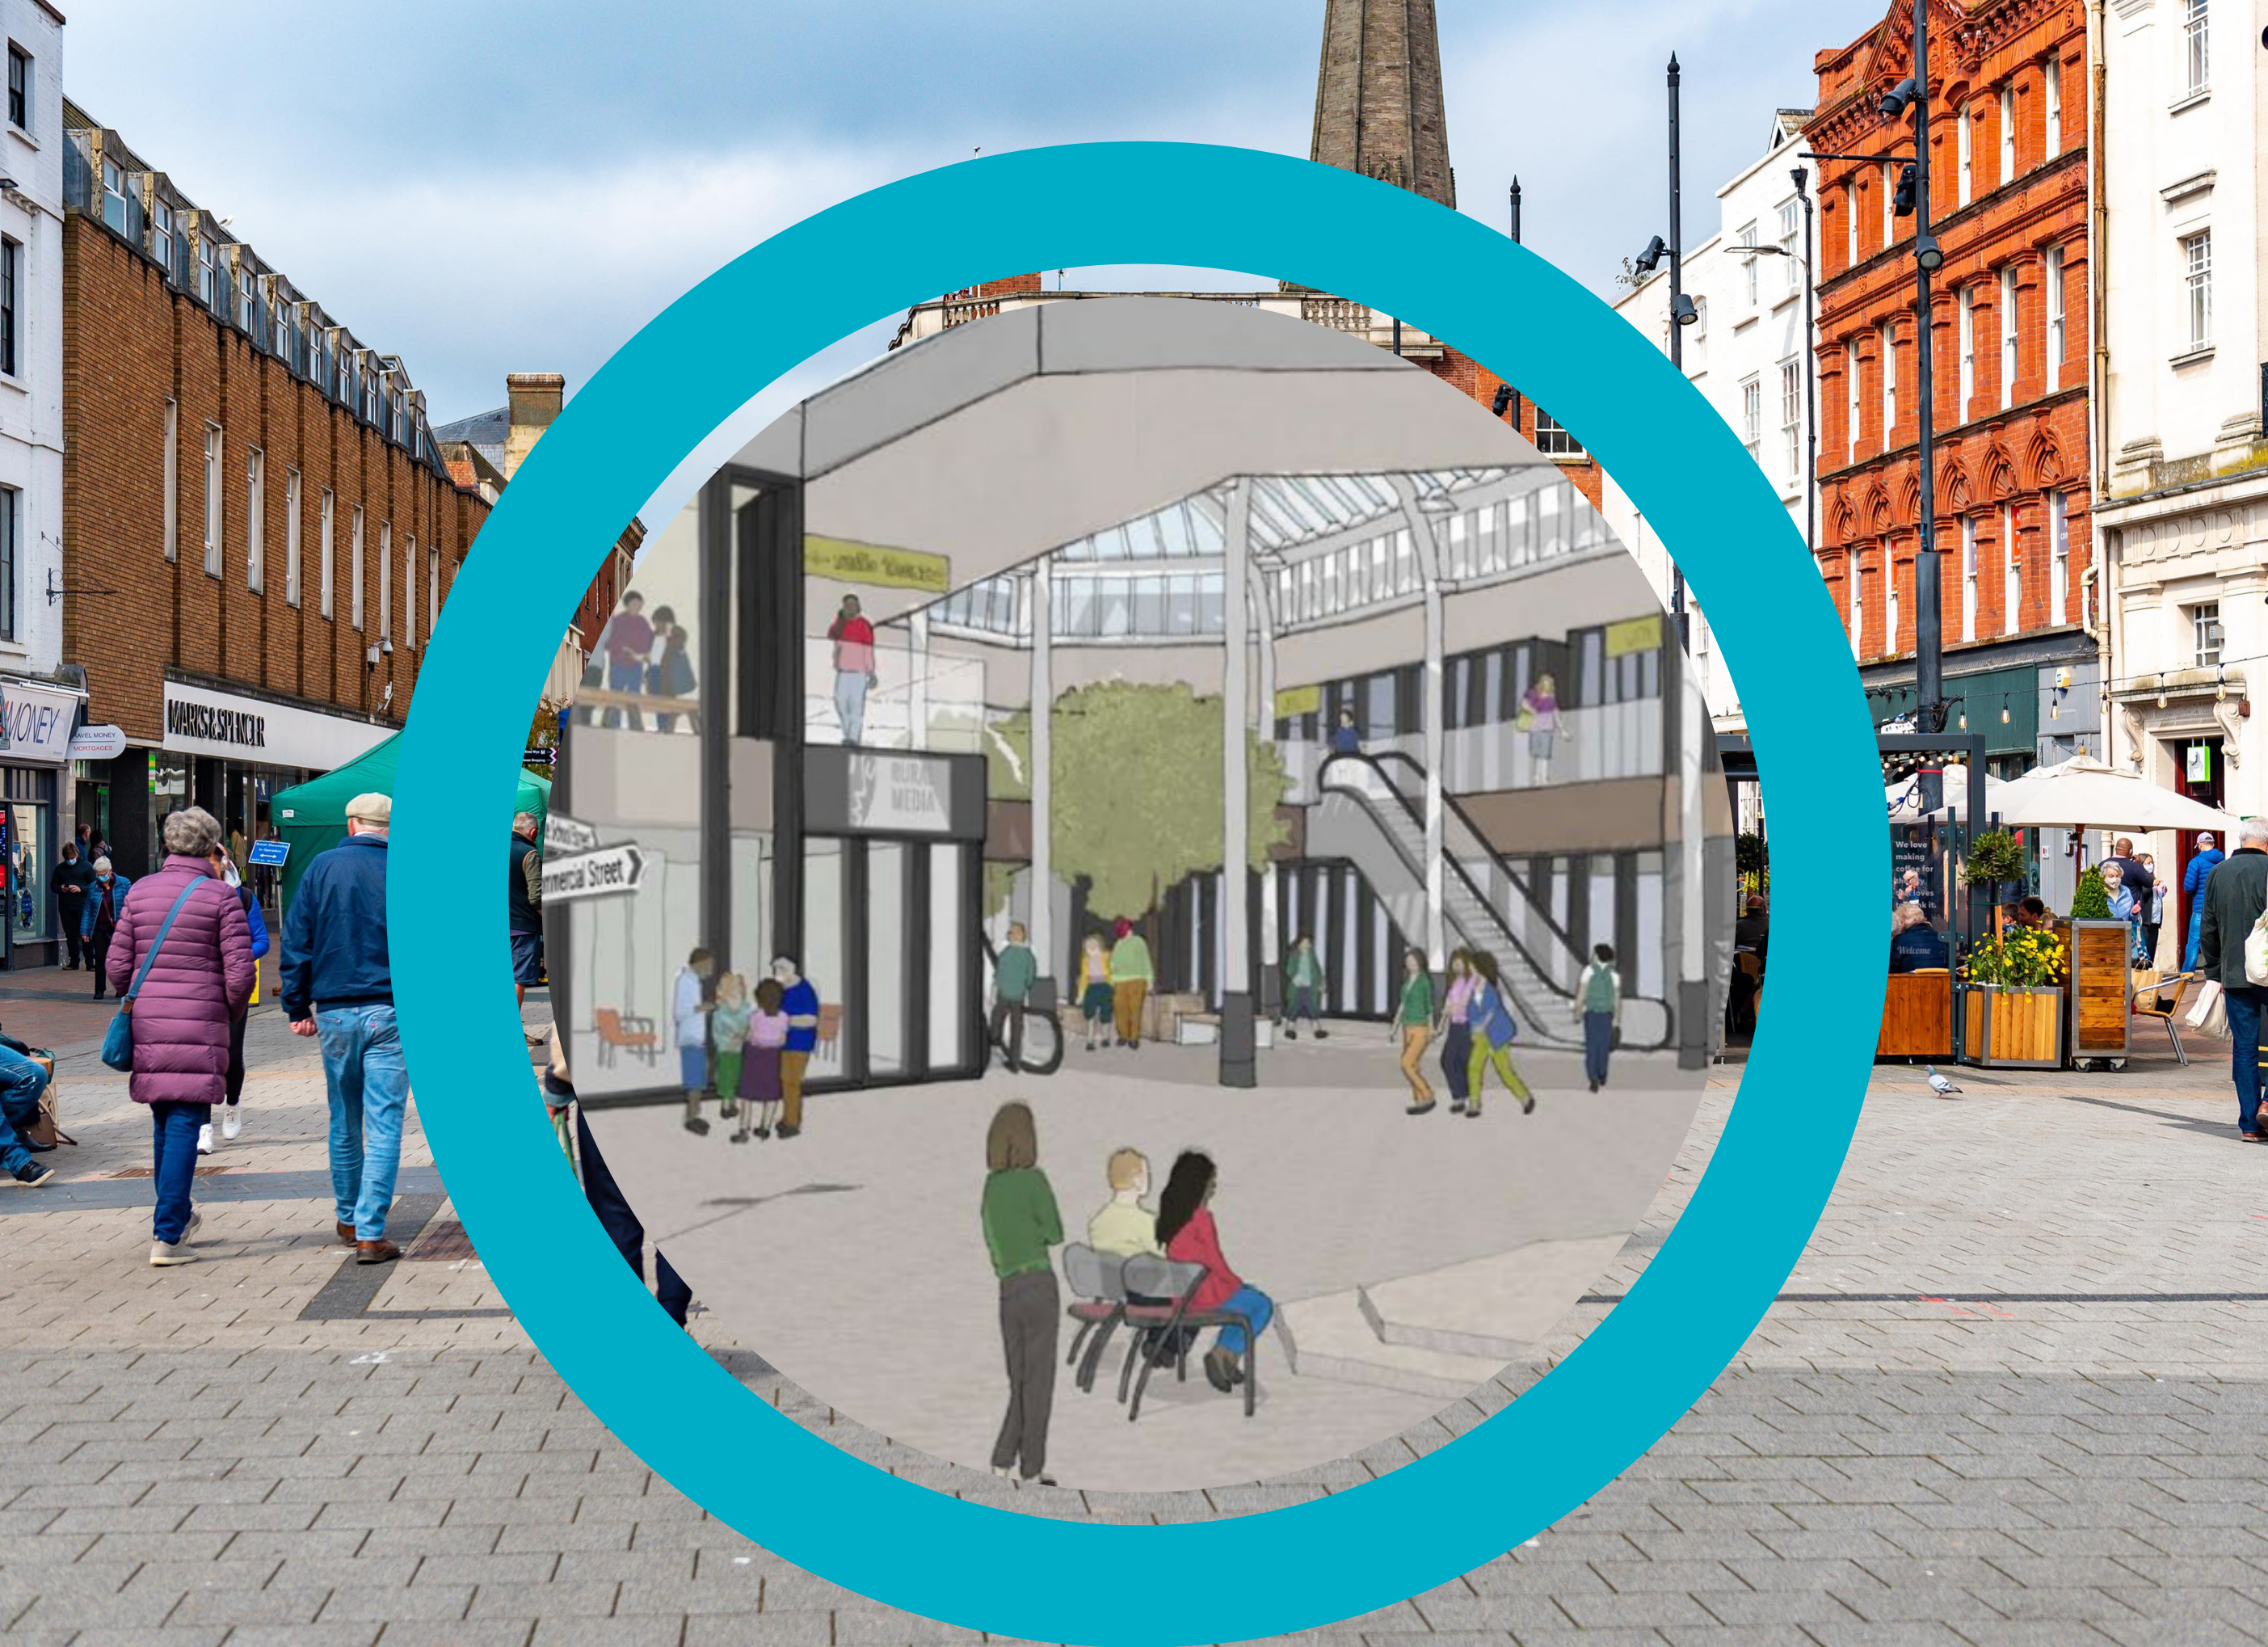 REVEALED | The £44 million plan to revitalise Hereford – SEE ALL THE PROJECTS